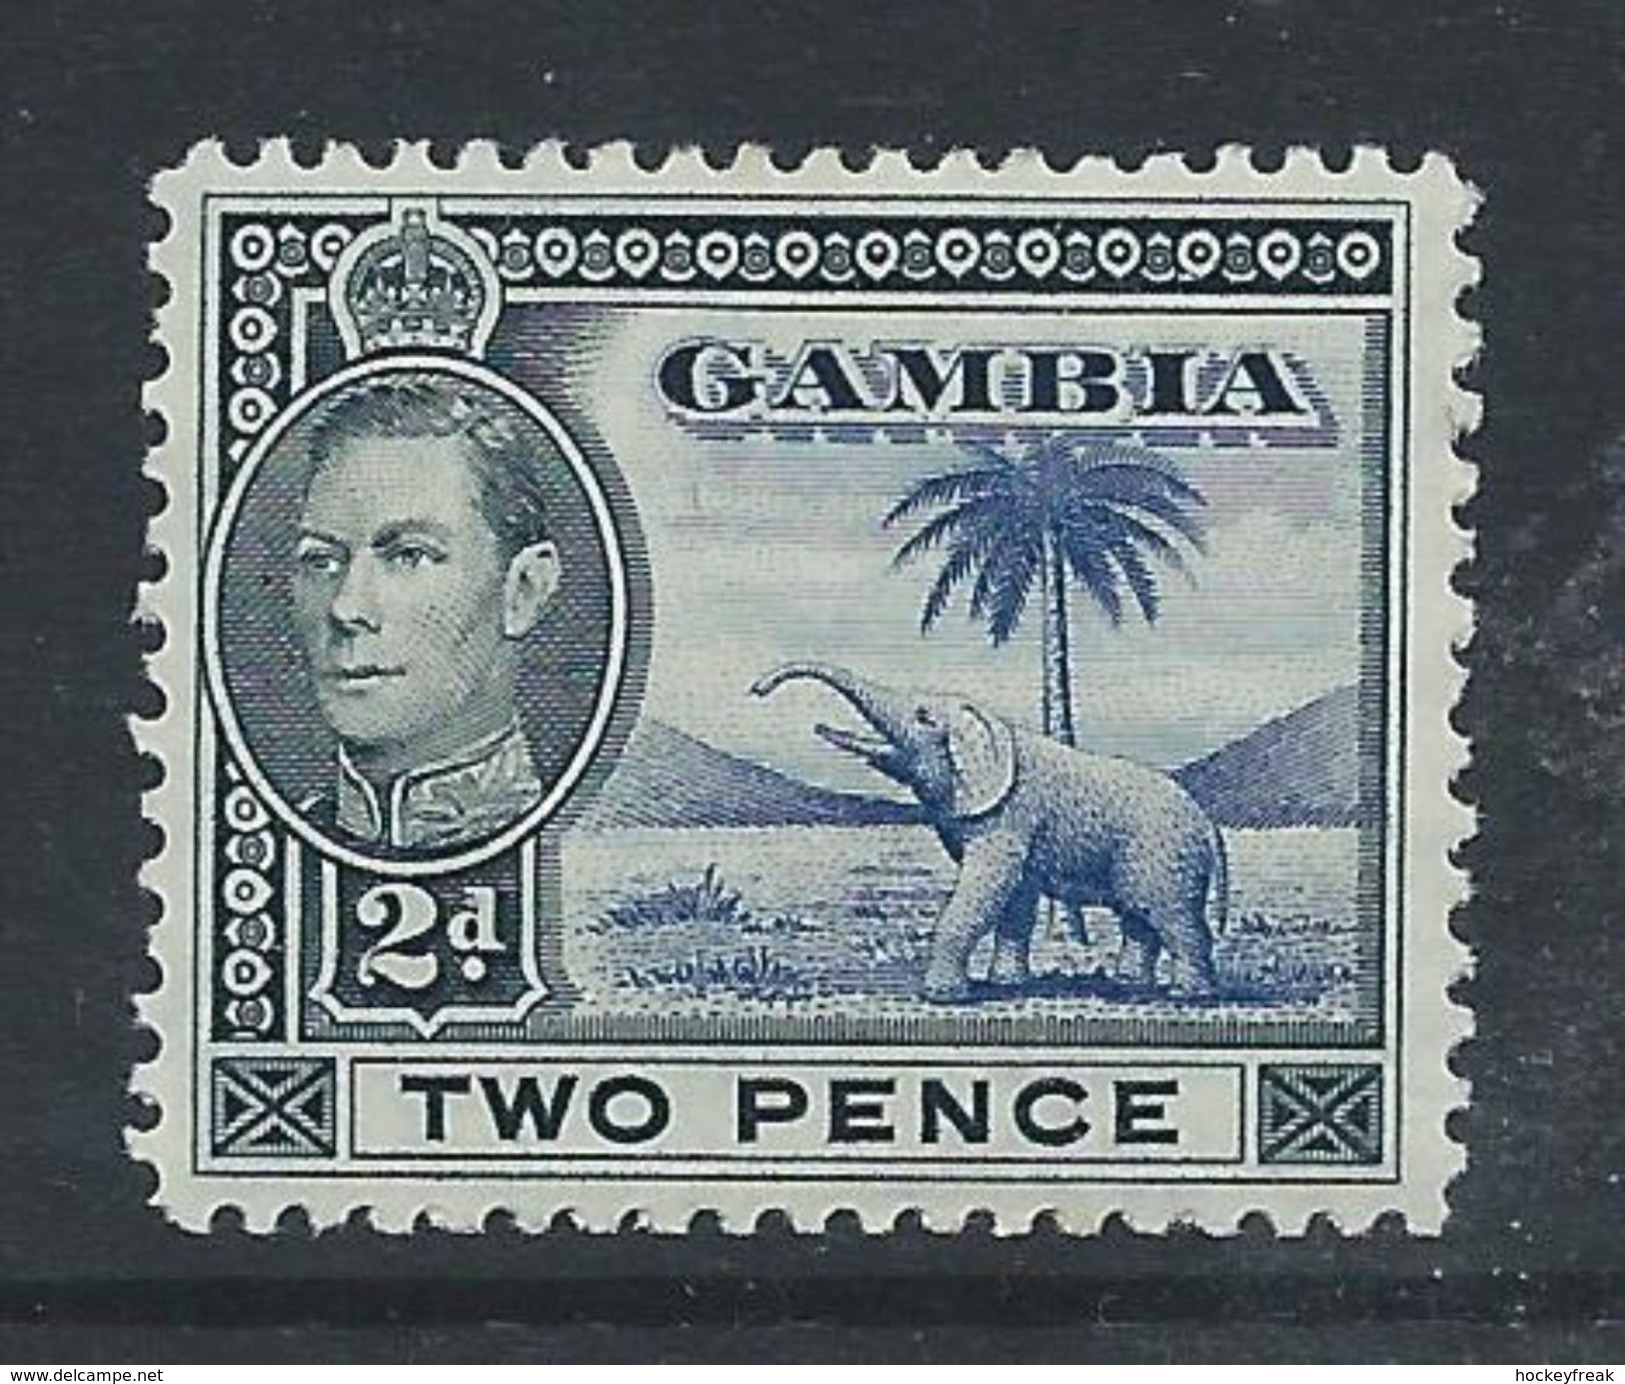 Gambia 1938 - 2d Blue & Black 'Elephant' SG153 LHM Cat £15 SG2018 For MNH - Gambia (...-1964)